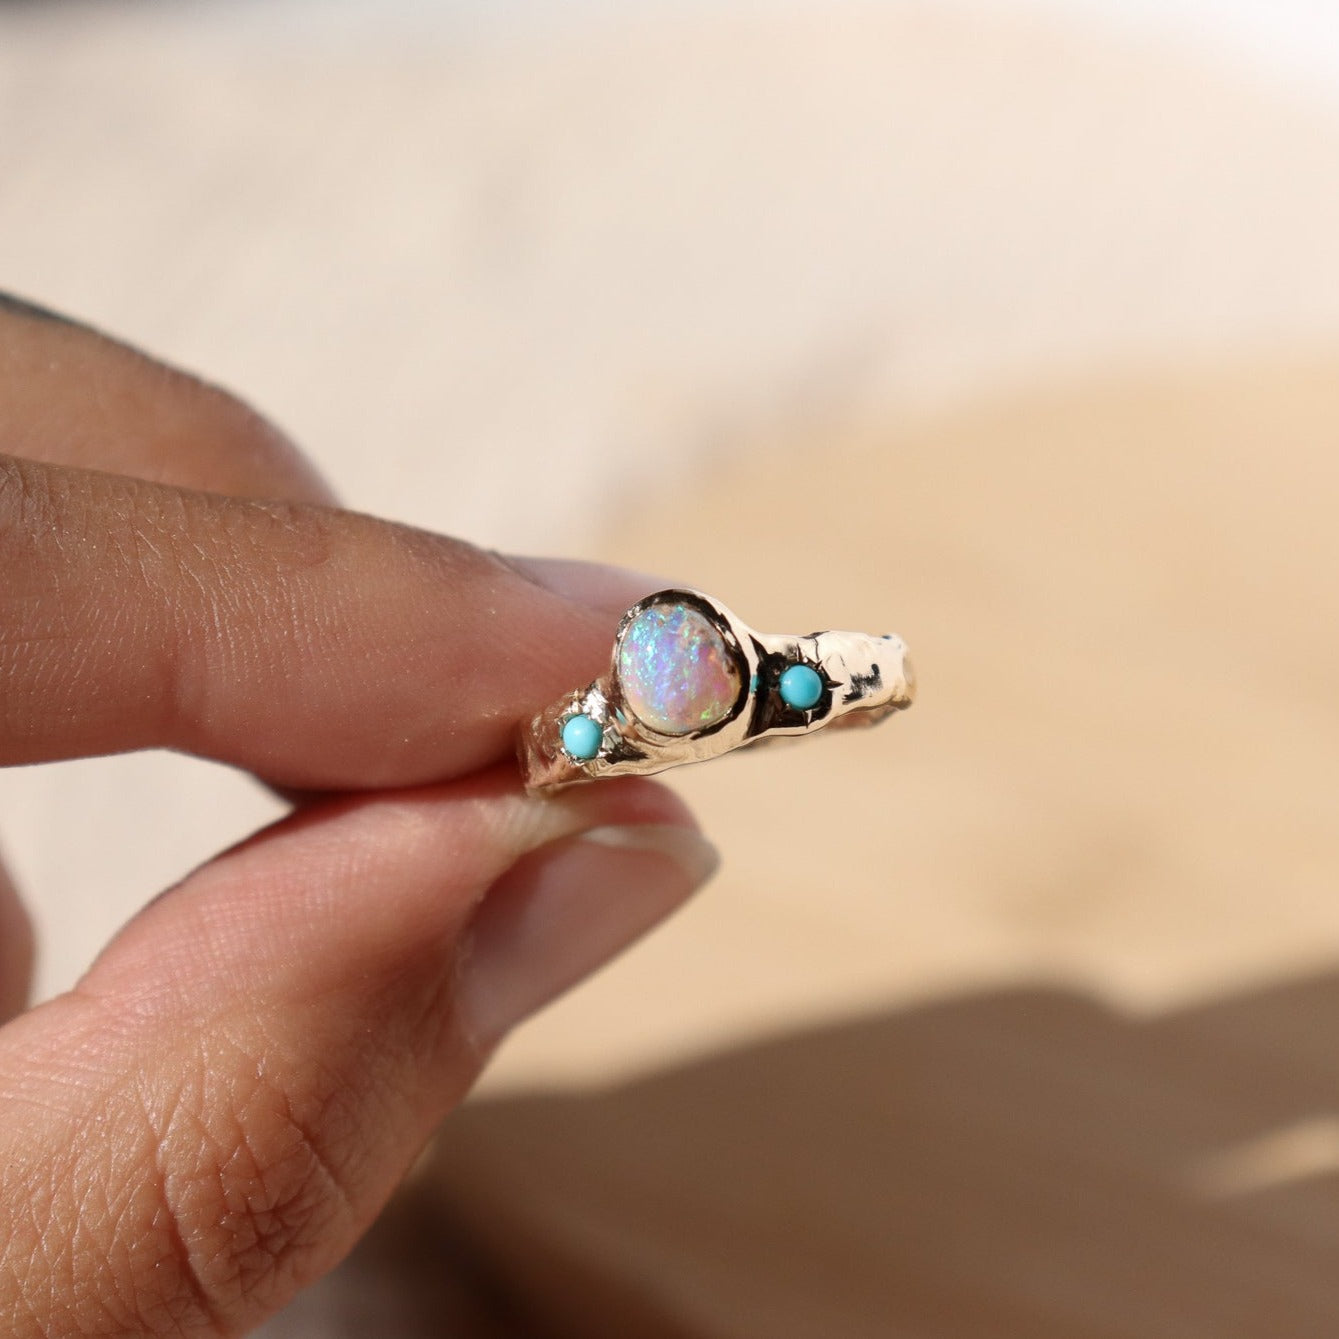 3/4 view of a wide gold band with a center opal and turquoise star settings